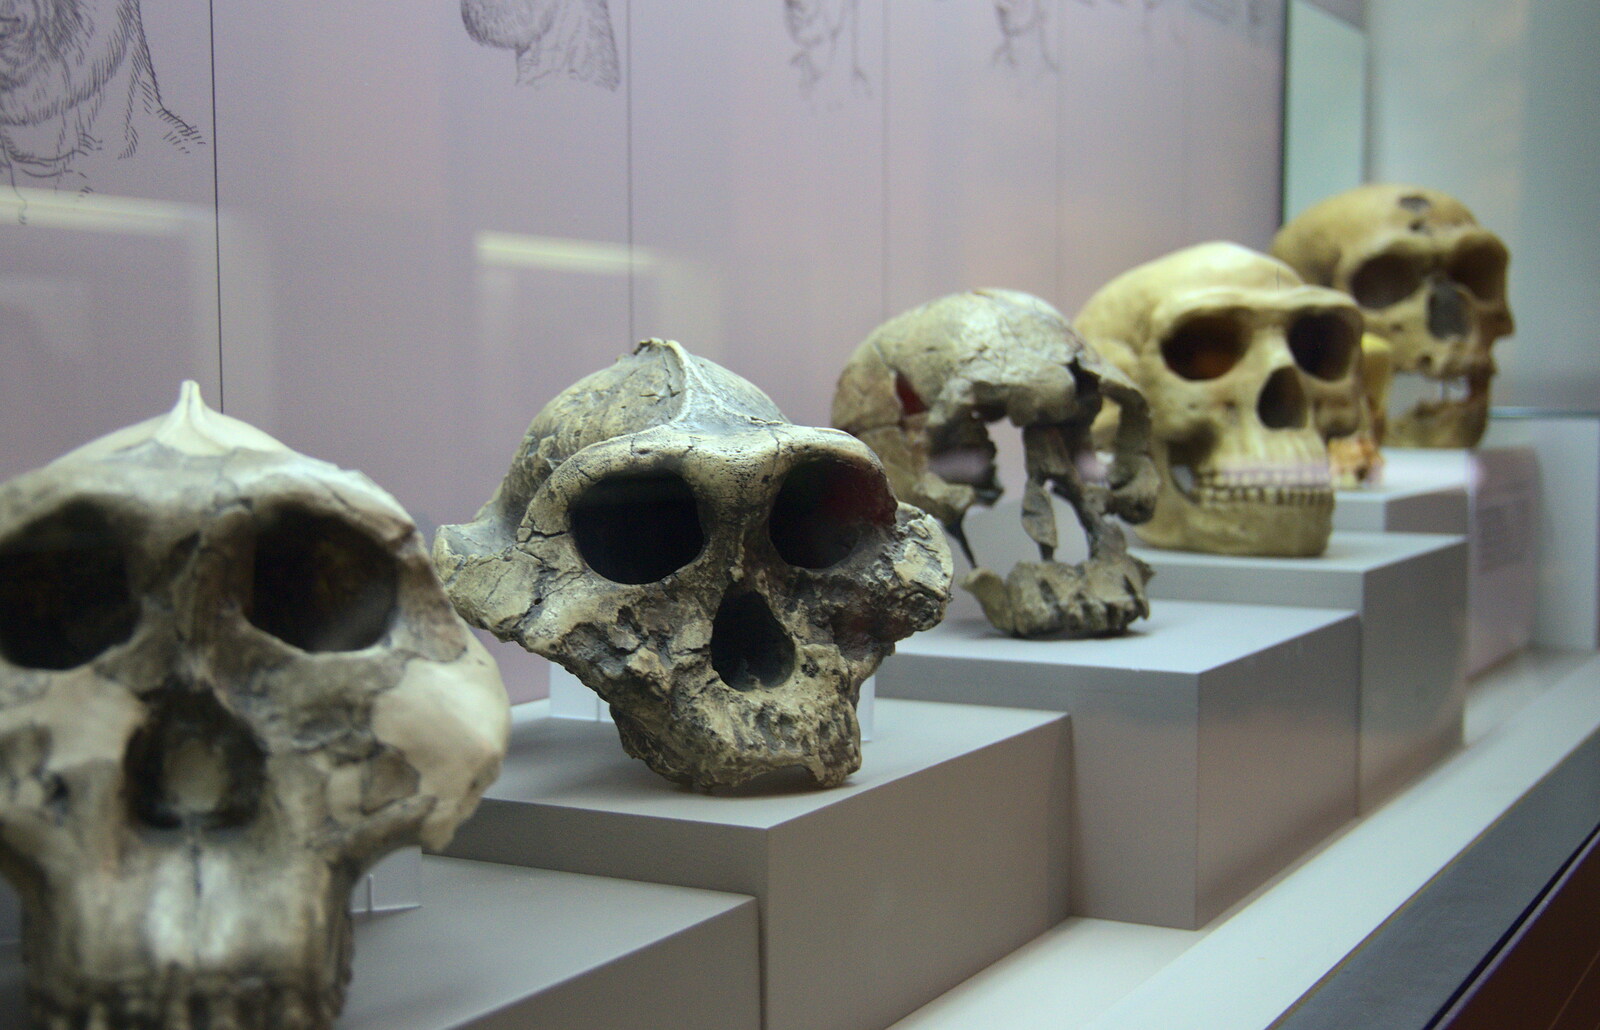 A collection of skulls in the museum of archaeology from Barcelona and Parc Montjuïc, Catalonia, Spain - 21st October 2017